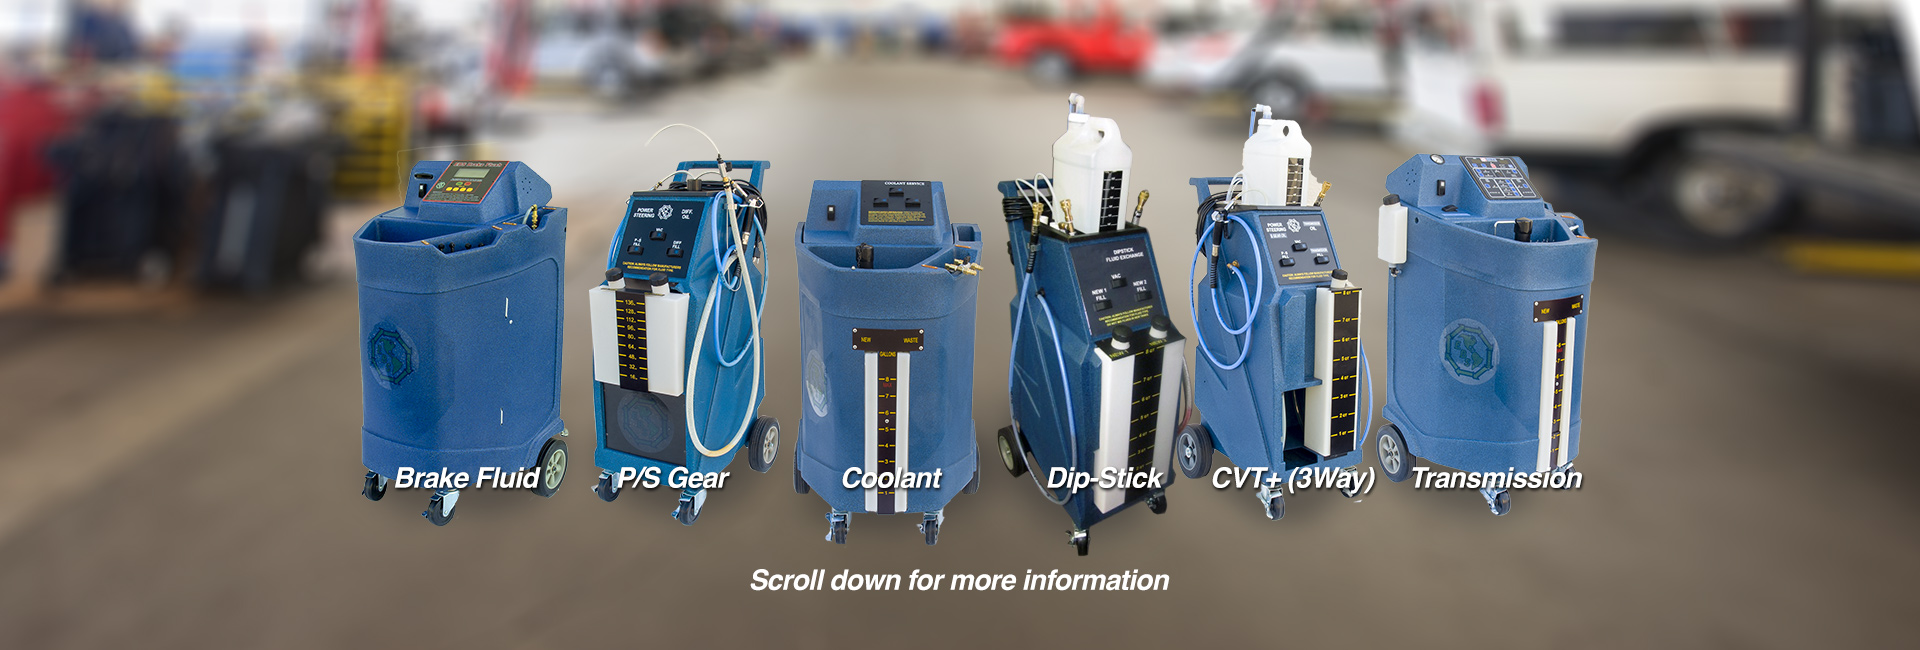 Self Contained Automotive Fluid Service Equipment